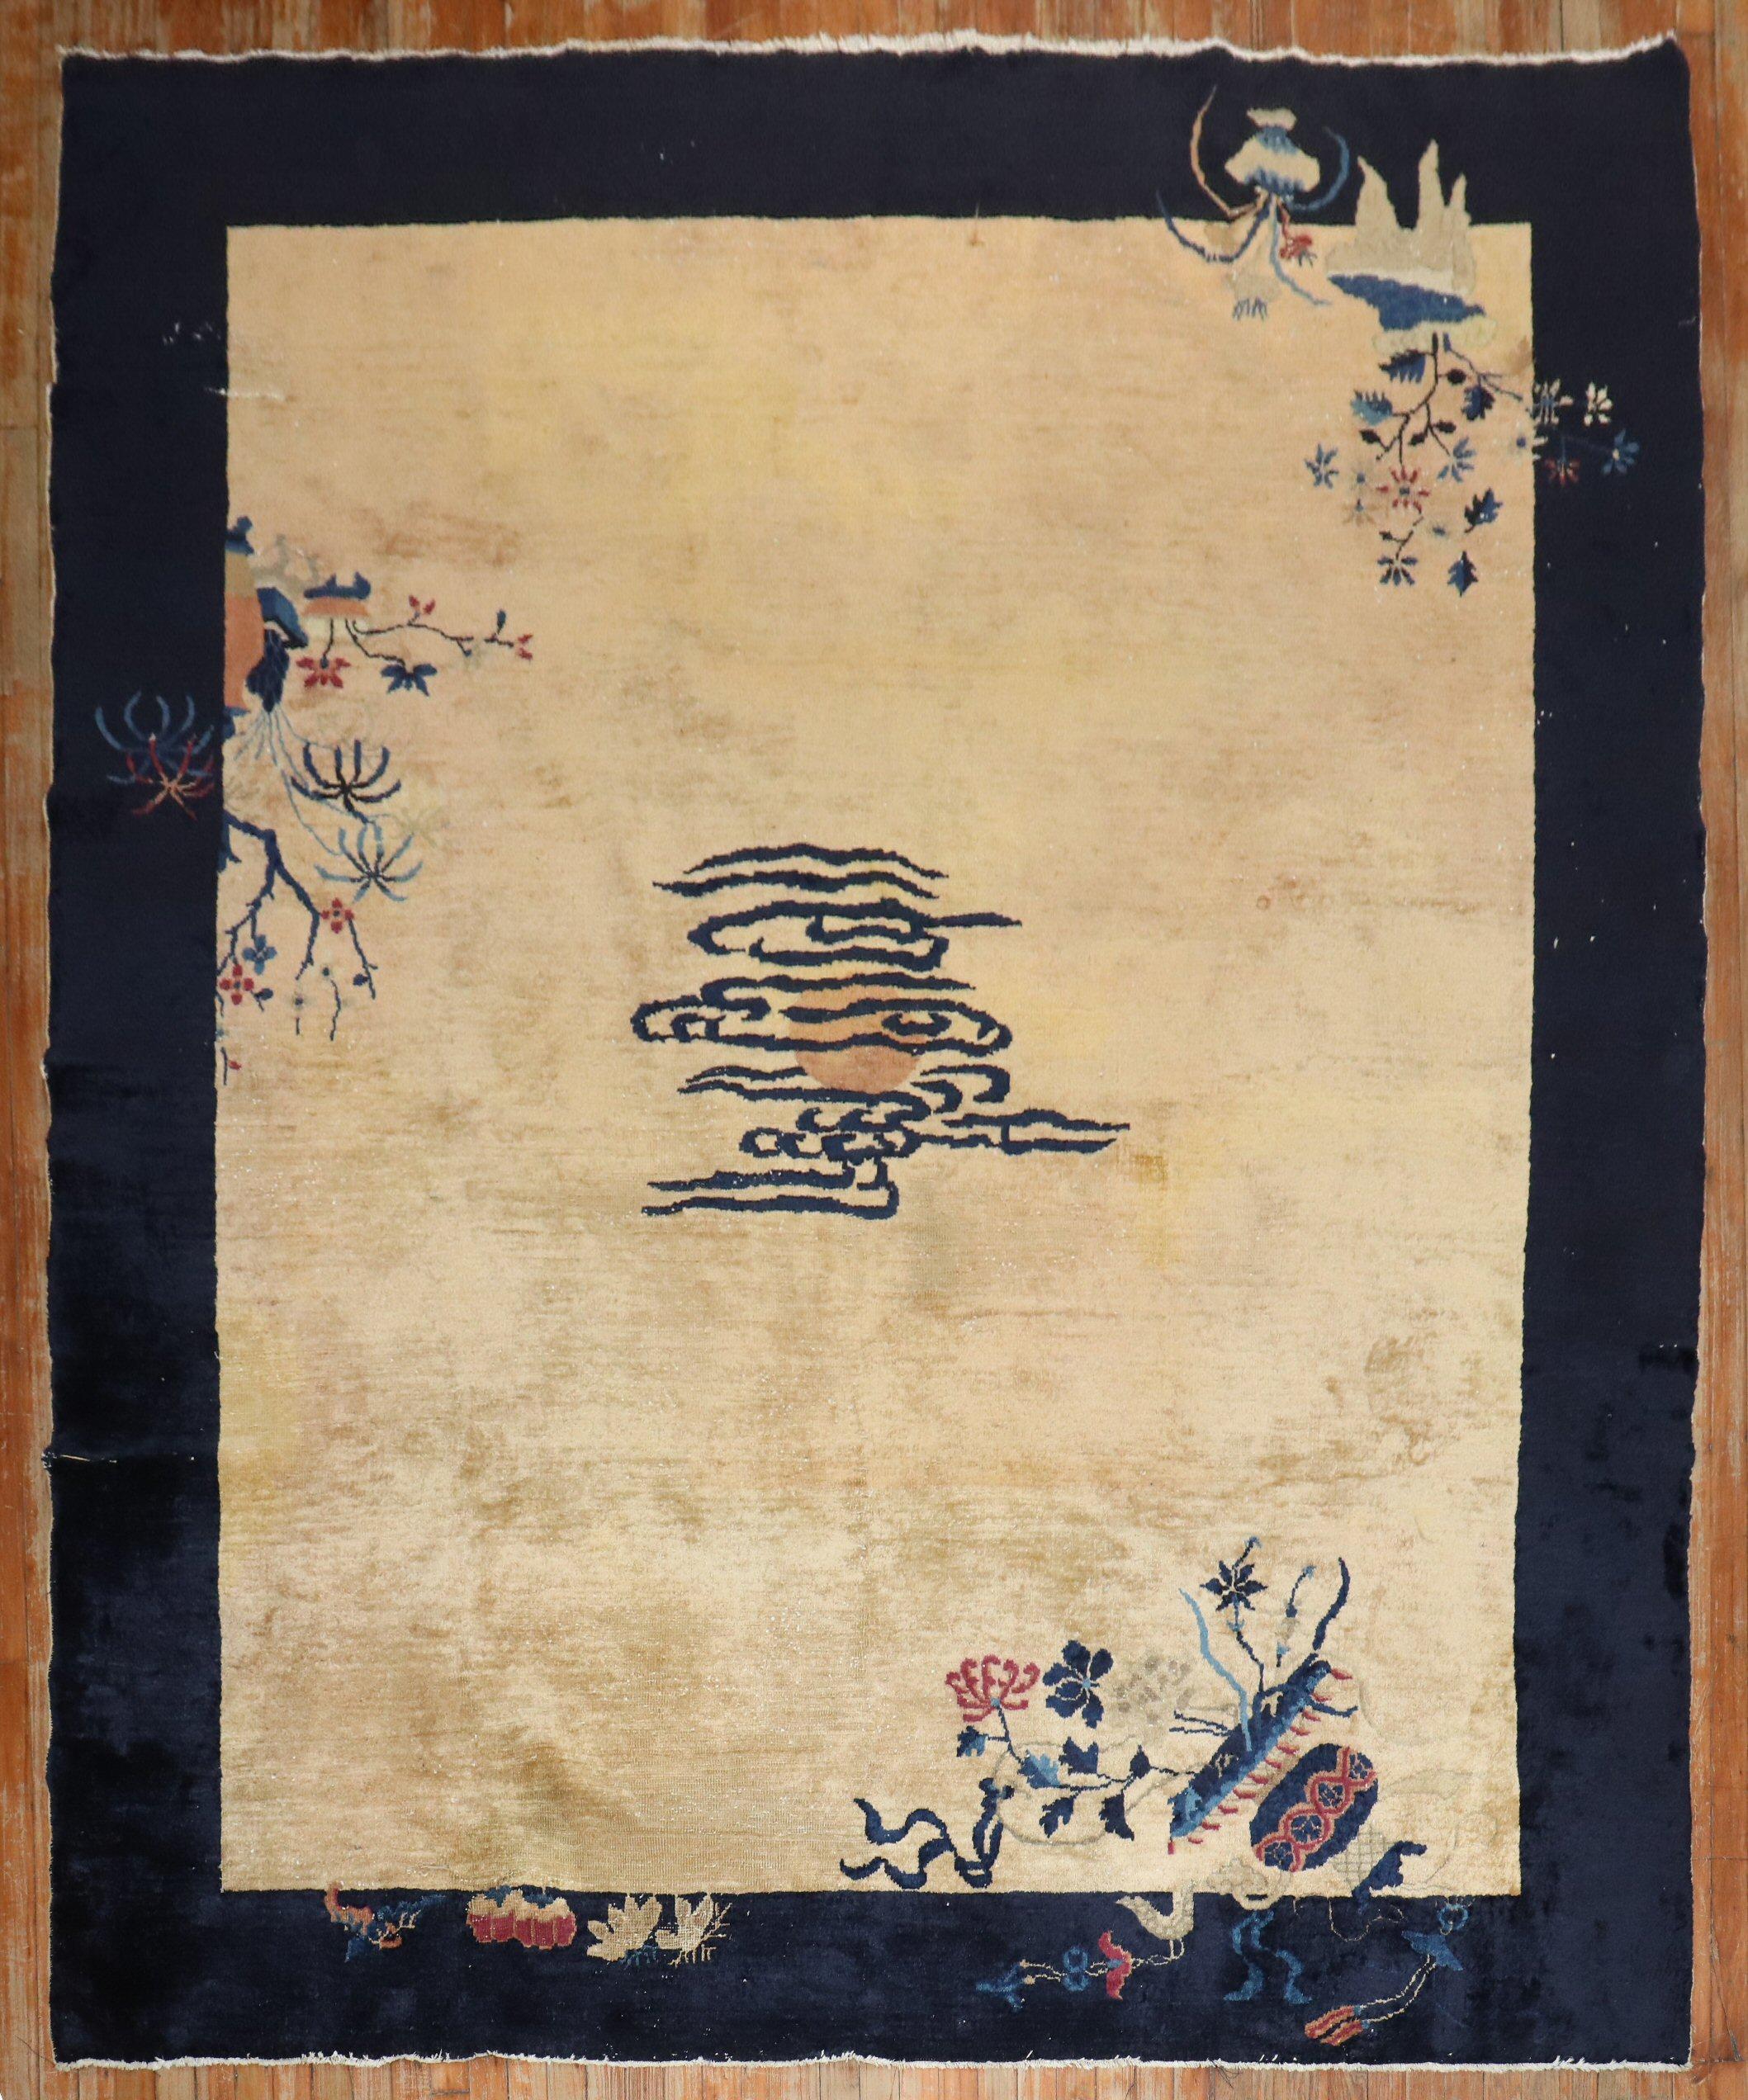 An authentic early-20th-century Chinese rug with a spacious open field floral design with an eclipsed medaion on a tan ground.

Measures: 8' x 9'8''.